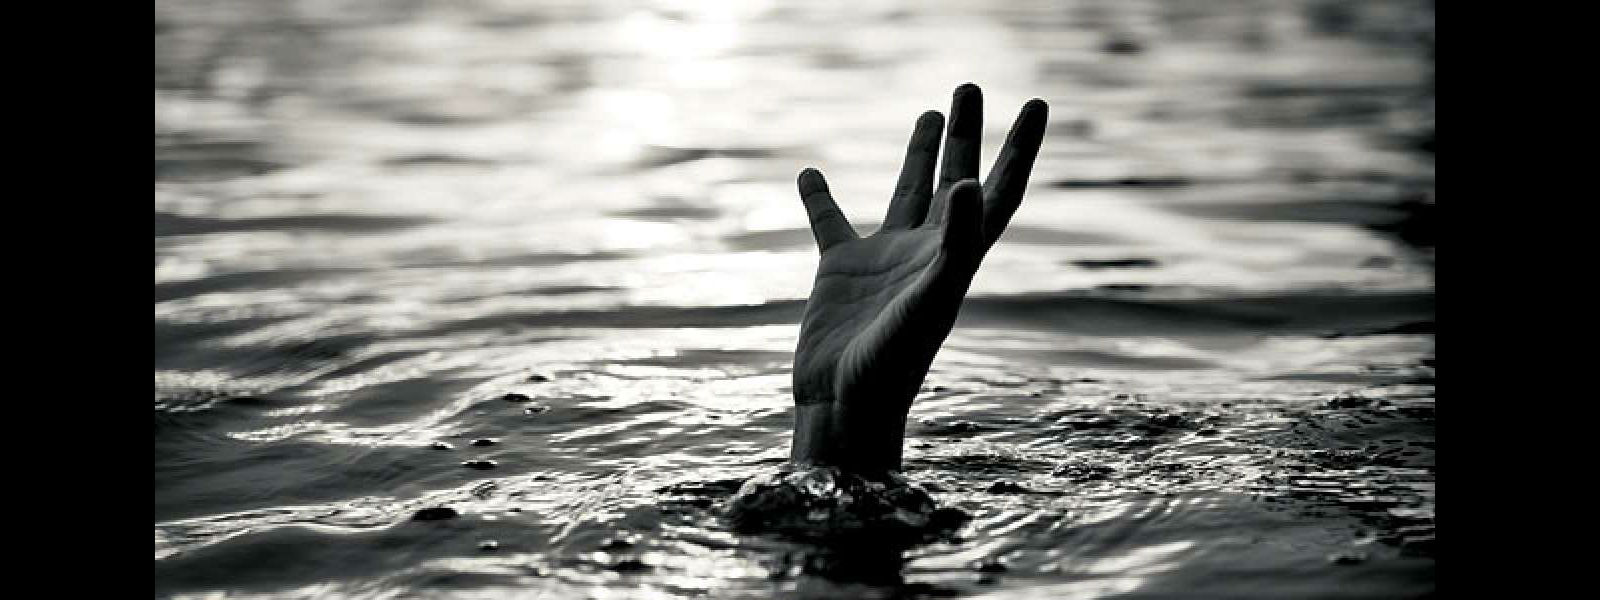 Man dies in attempt to save drowning girl